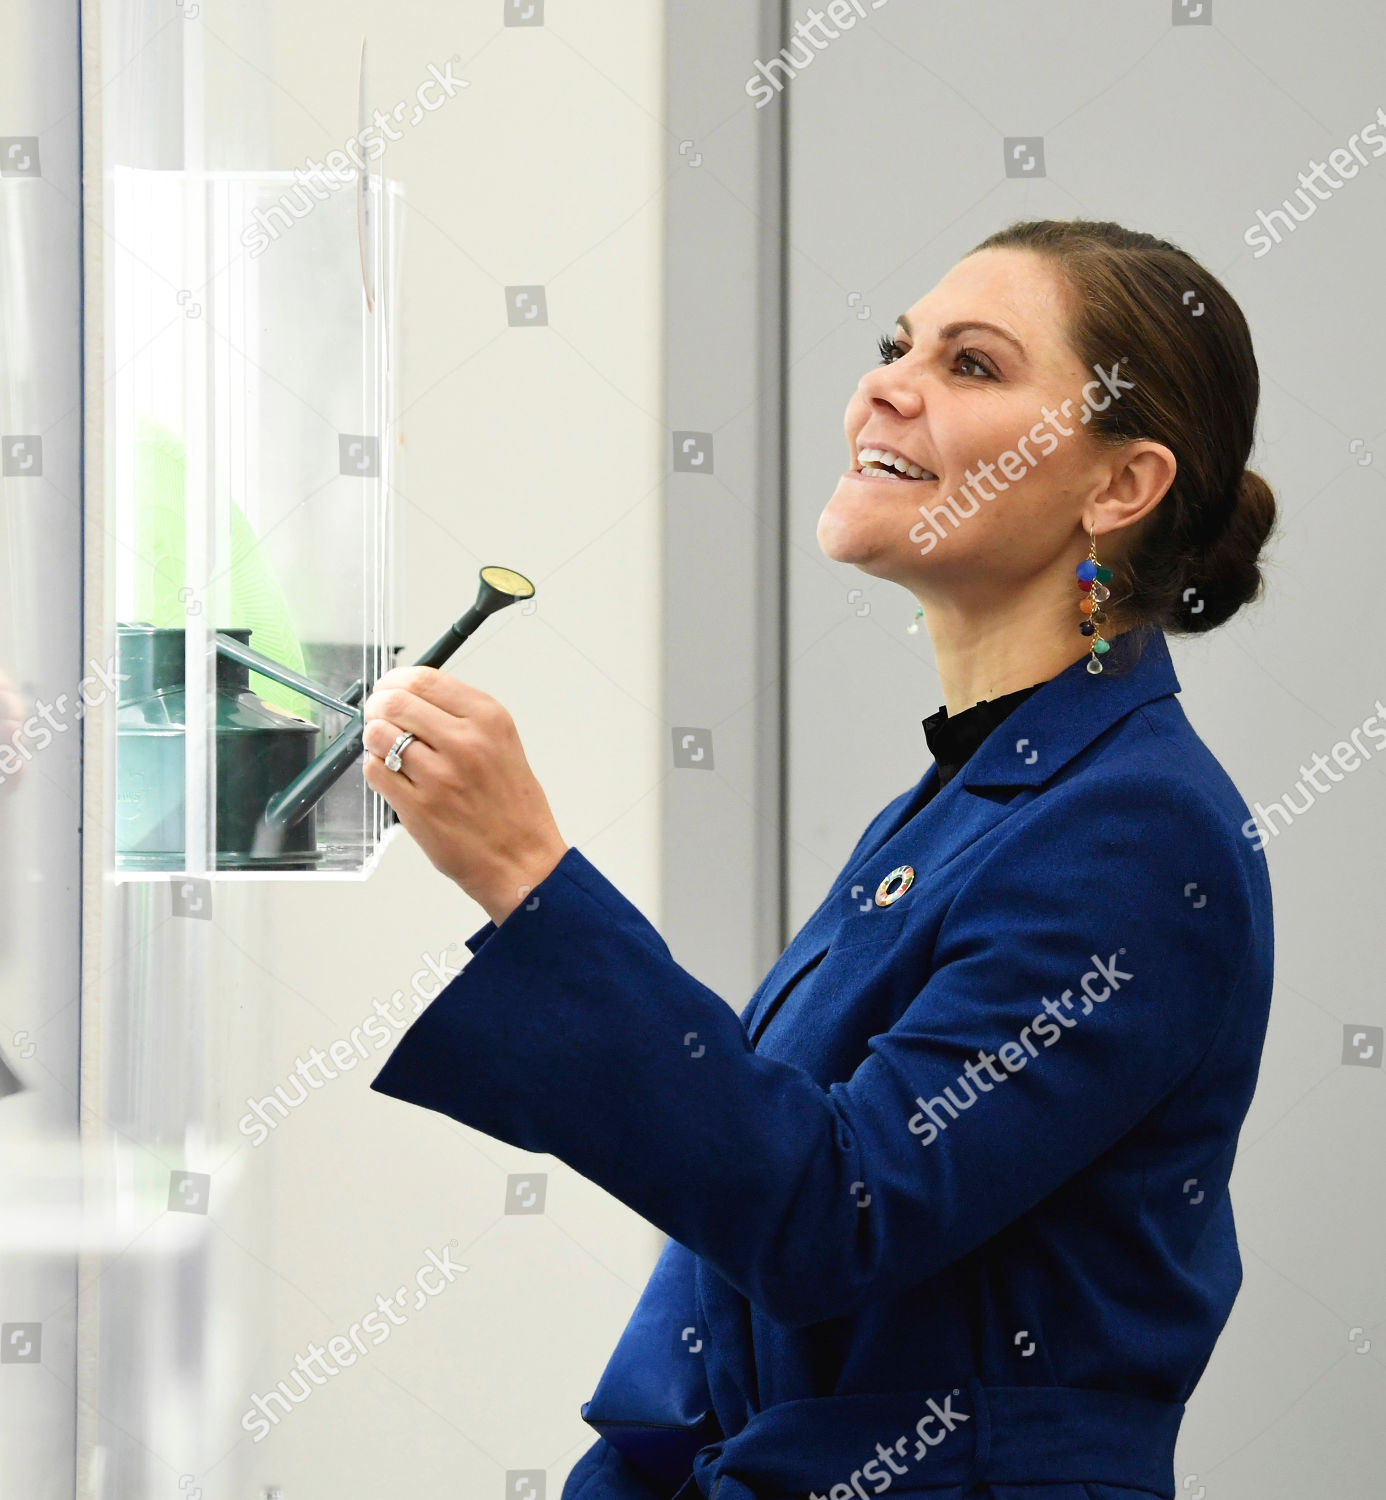 crown-princess-victoria-visits-the-swedish-plastic-recycling-plant-motala-sweden-shutterstock-editorial-10448317d.jpg